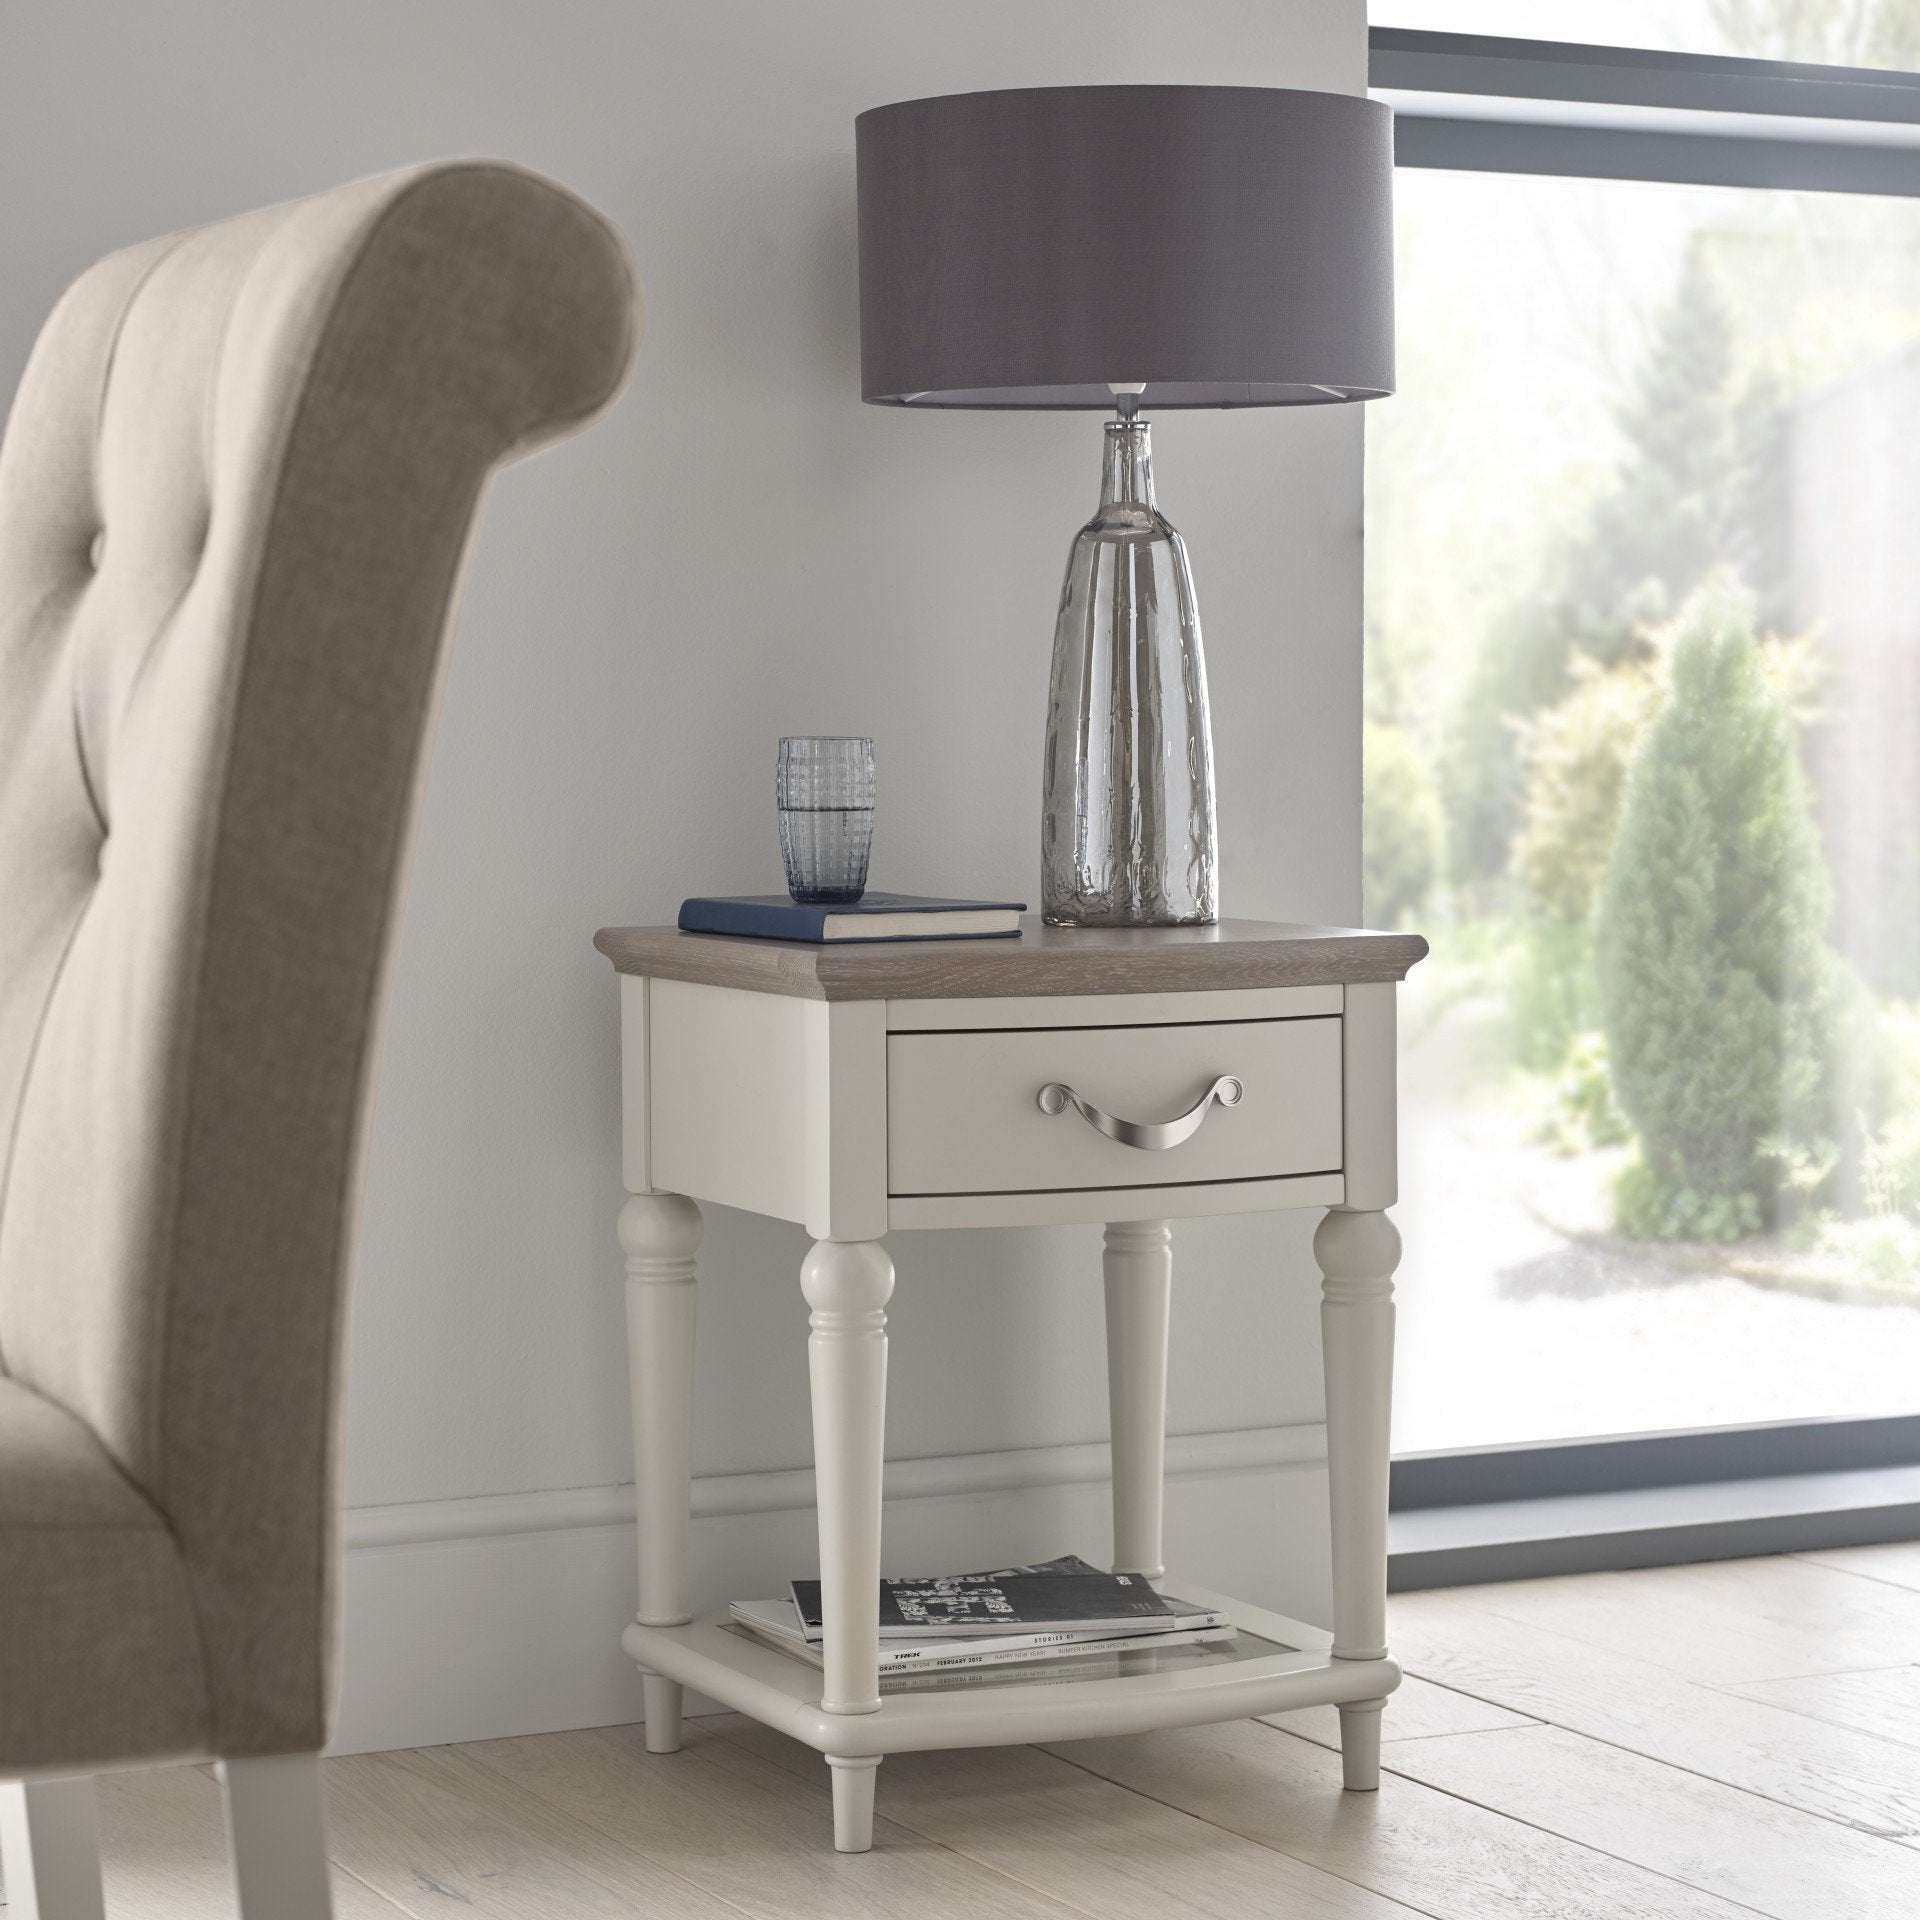 Montreux Grey Lamp Table from Upstairs Downstairs Furniture in Lisburn, Monaghan and Enniskillen